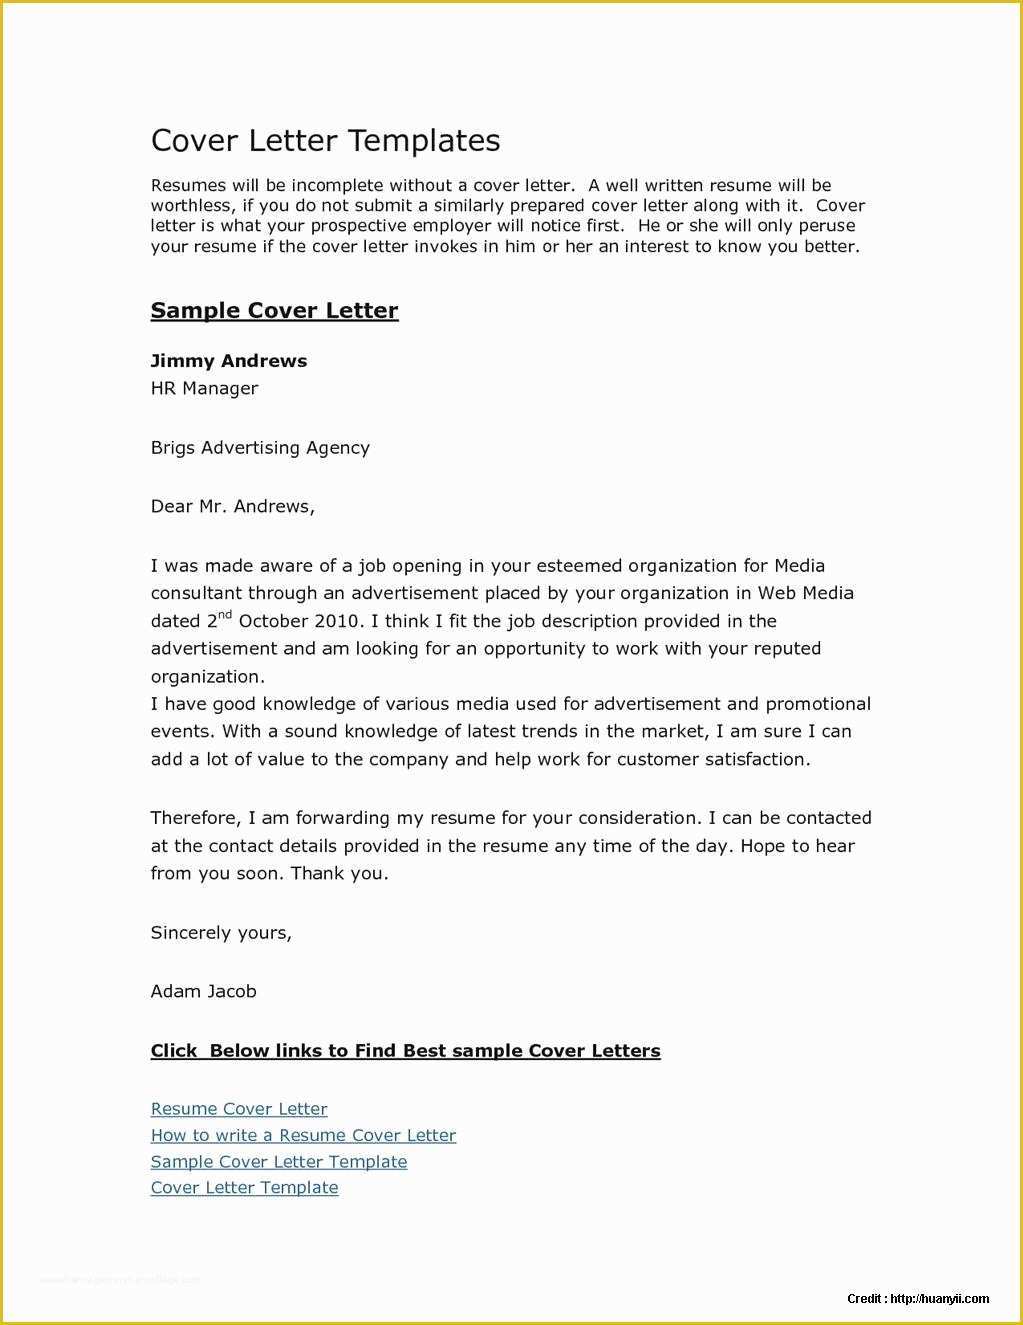 57 Free Resume and Cover Letter Templates